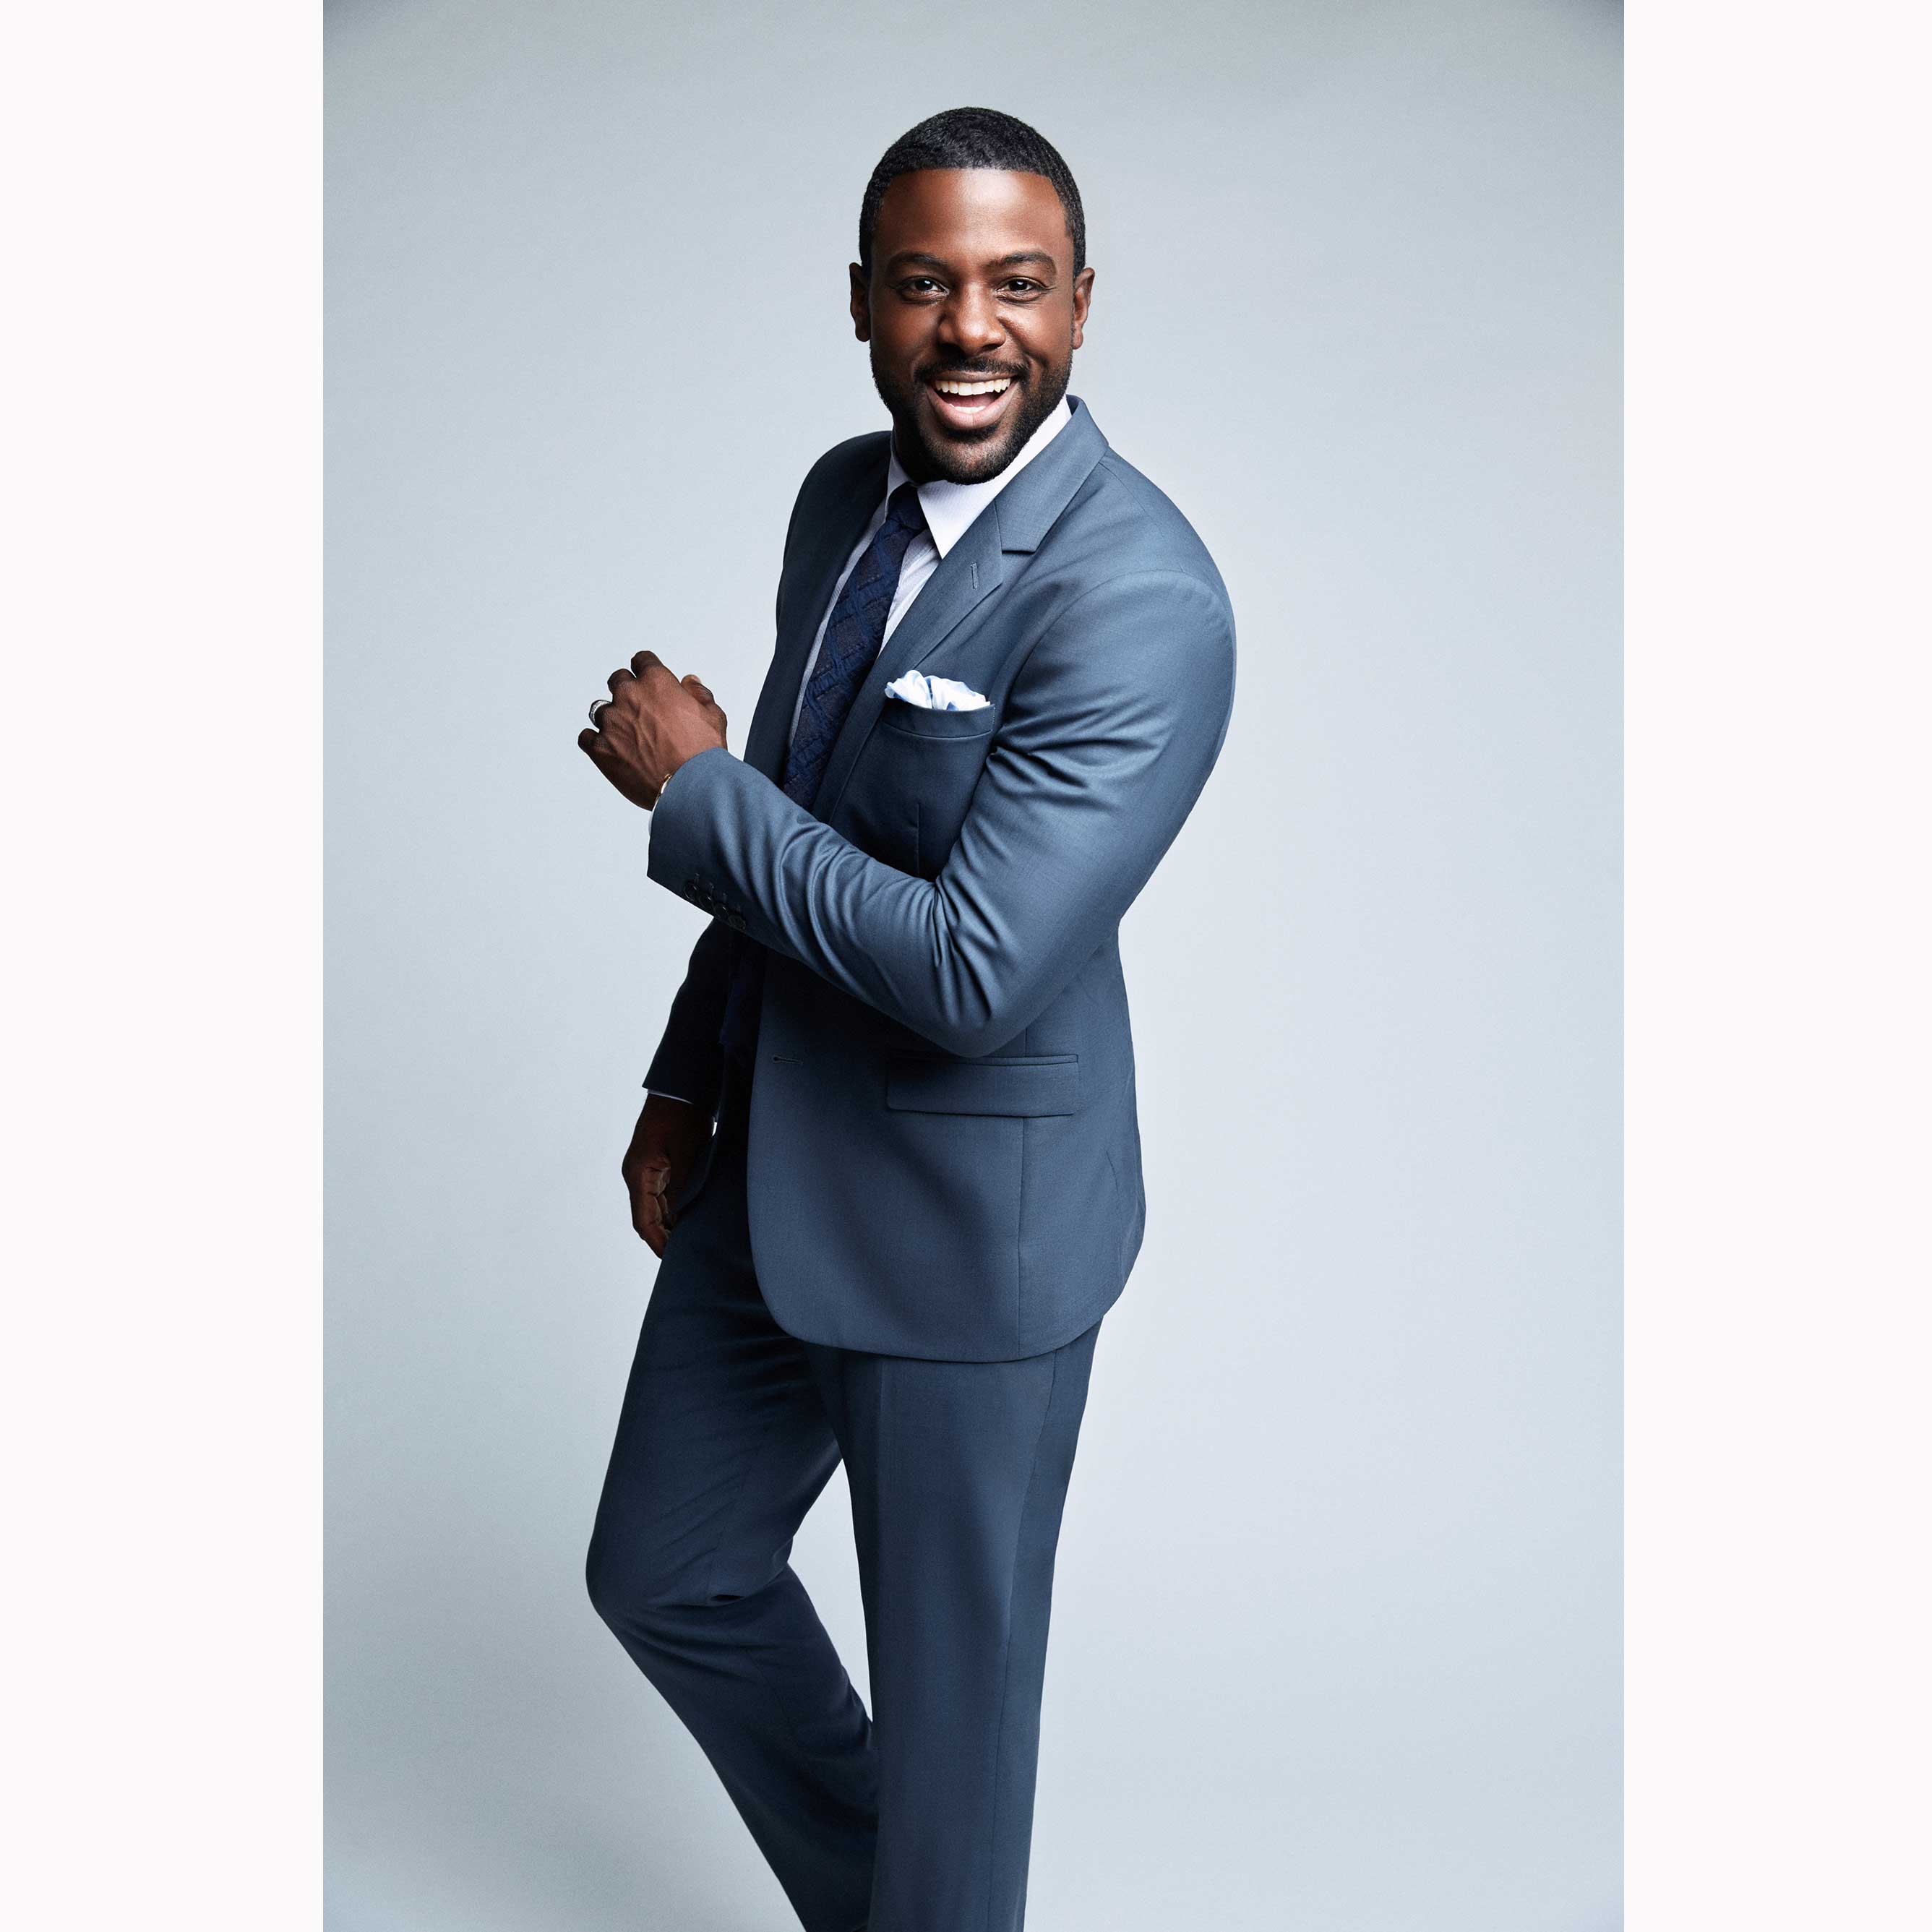 13 (New!) Photos Of Lance Gross Looking His Absolute Sexiest
